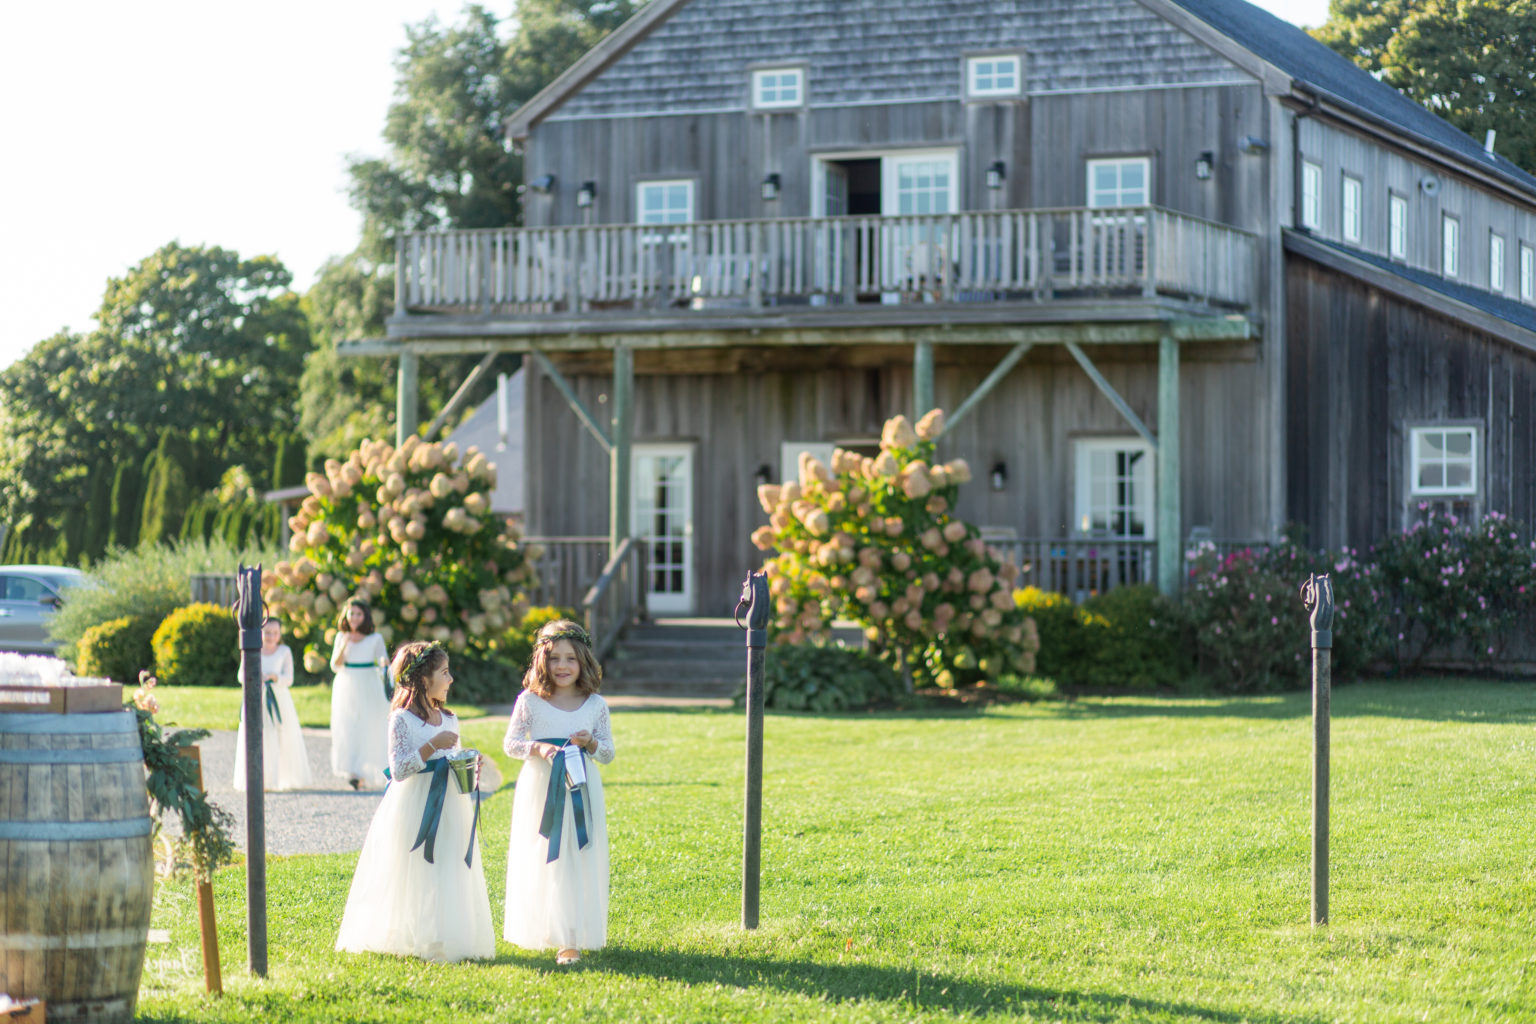 Here are TWO of our favorite Long Island Wedding Venues